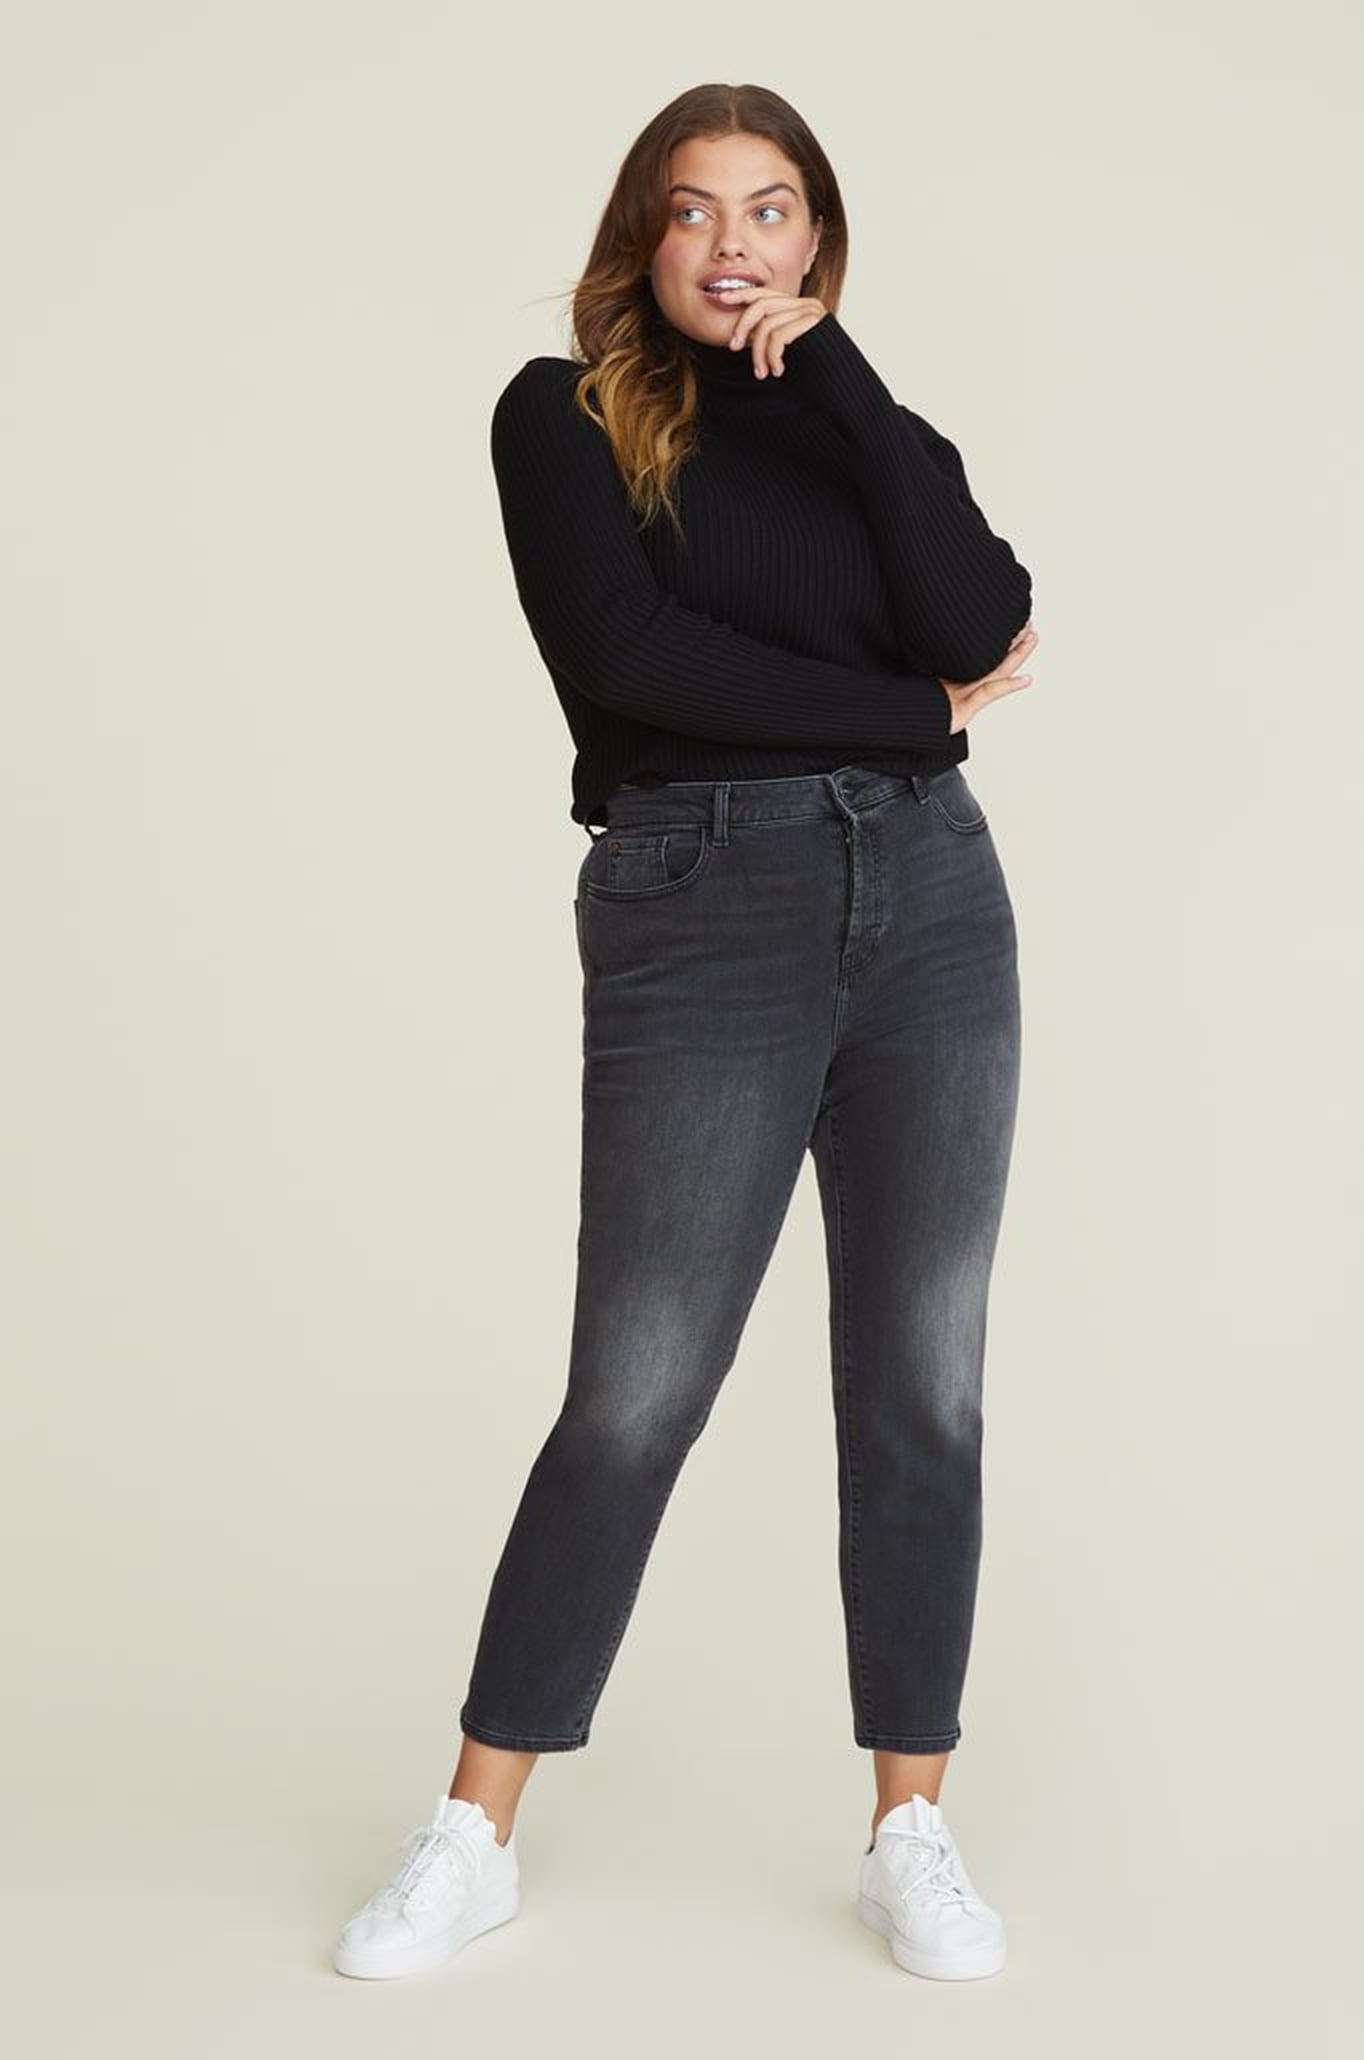 The Best Denim Brands With Extended Sizes | POPSUGAR Fashion